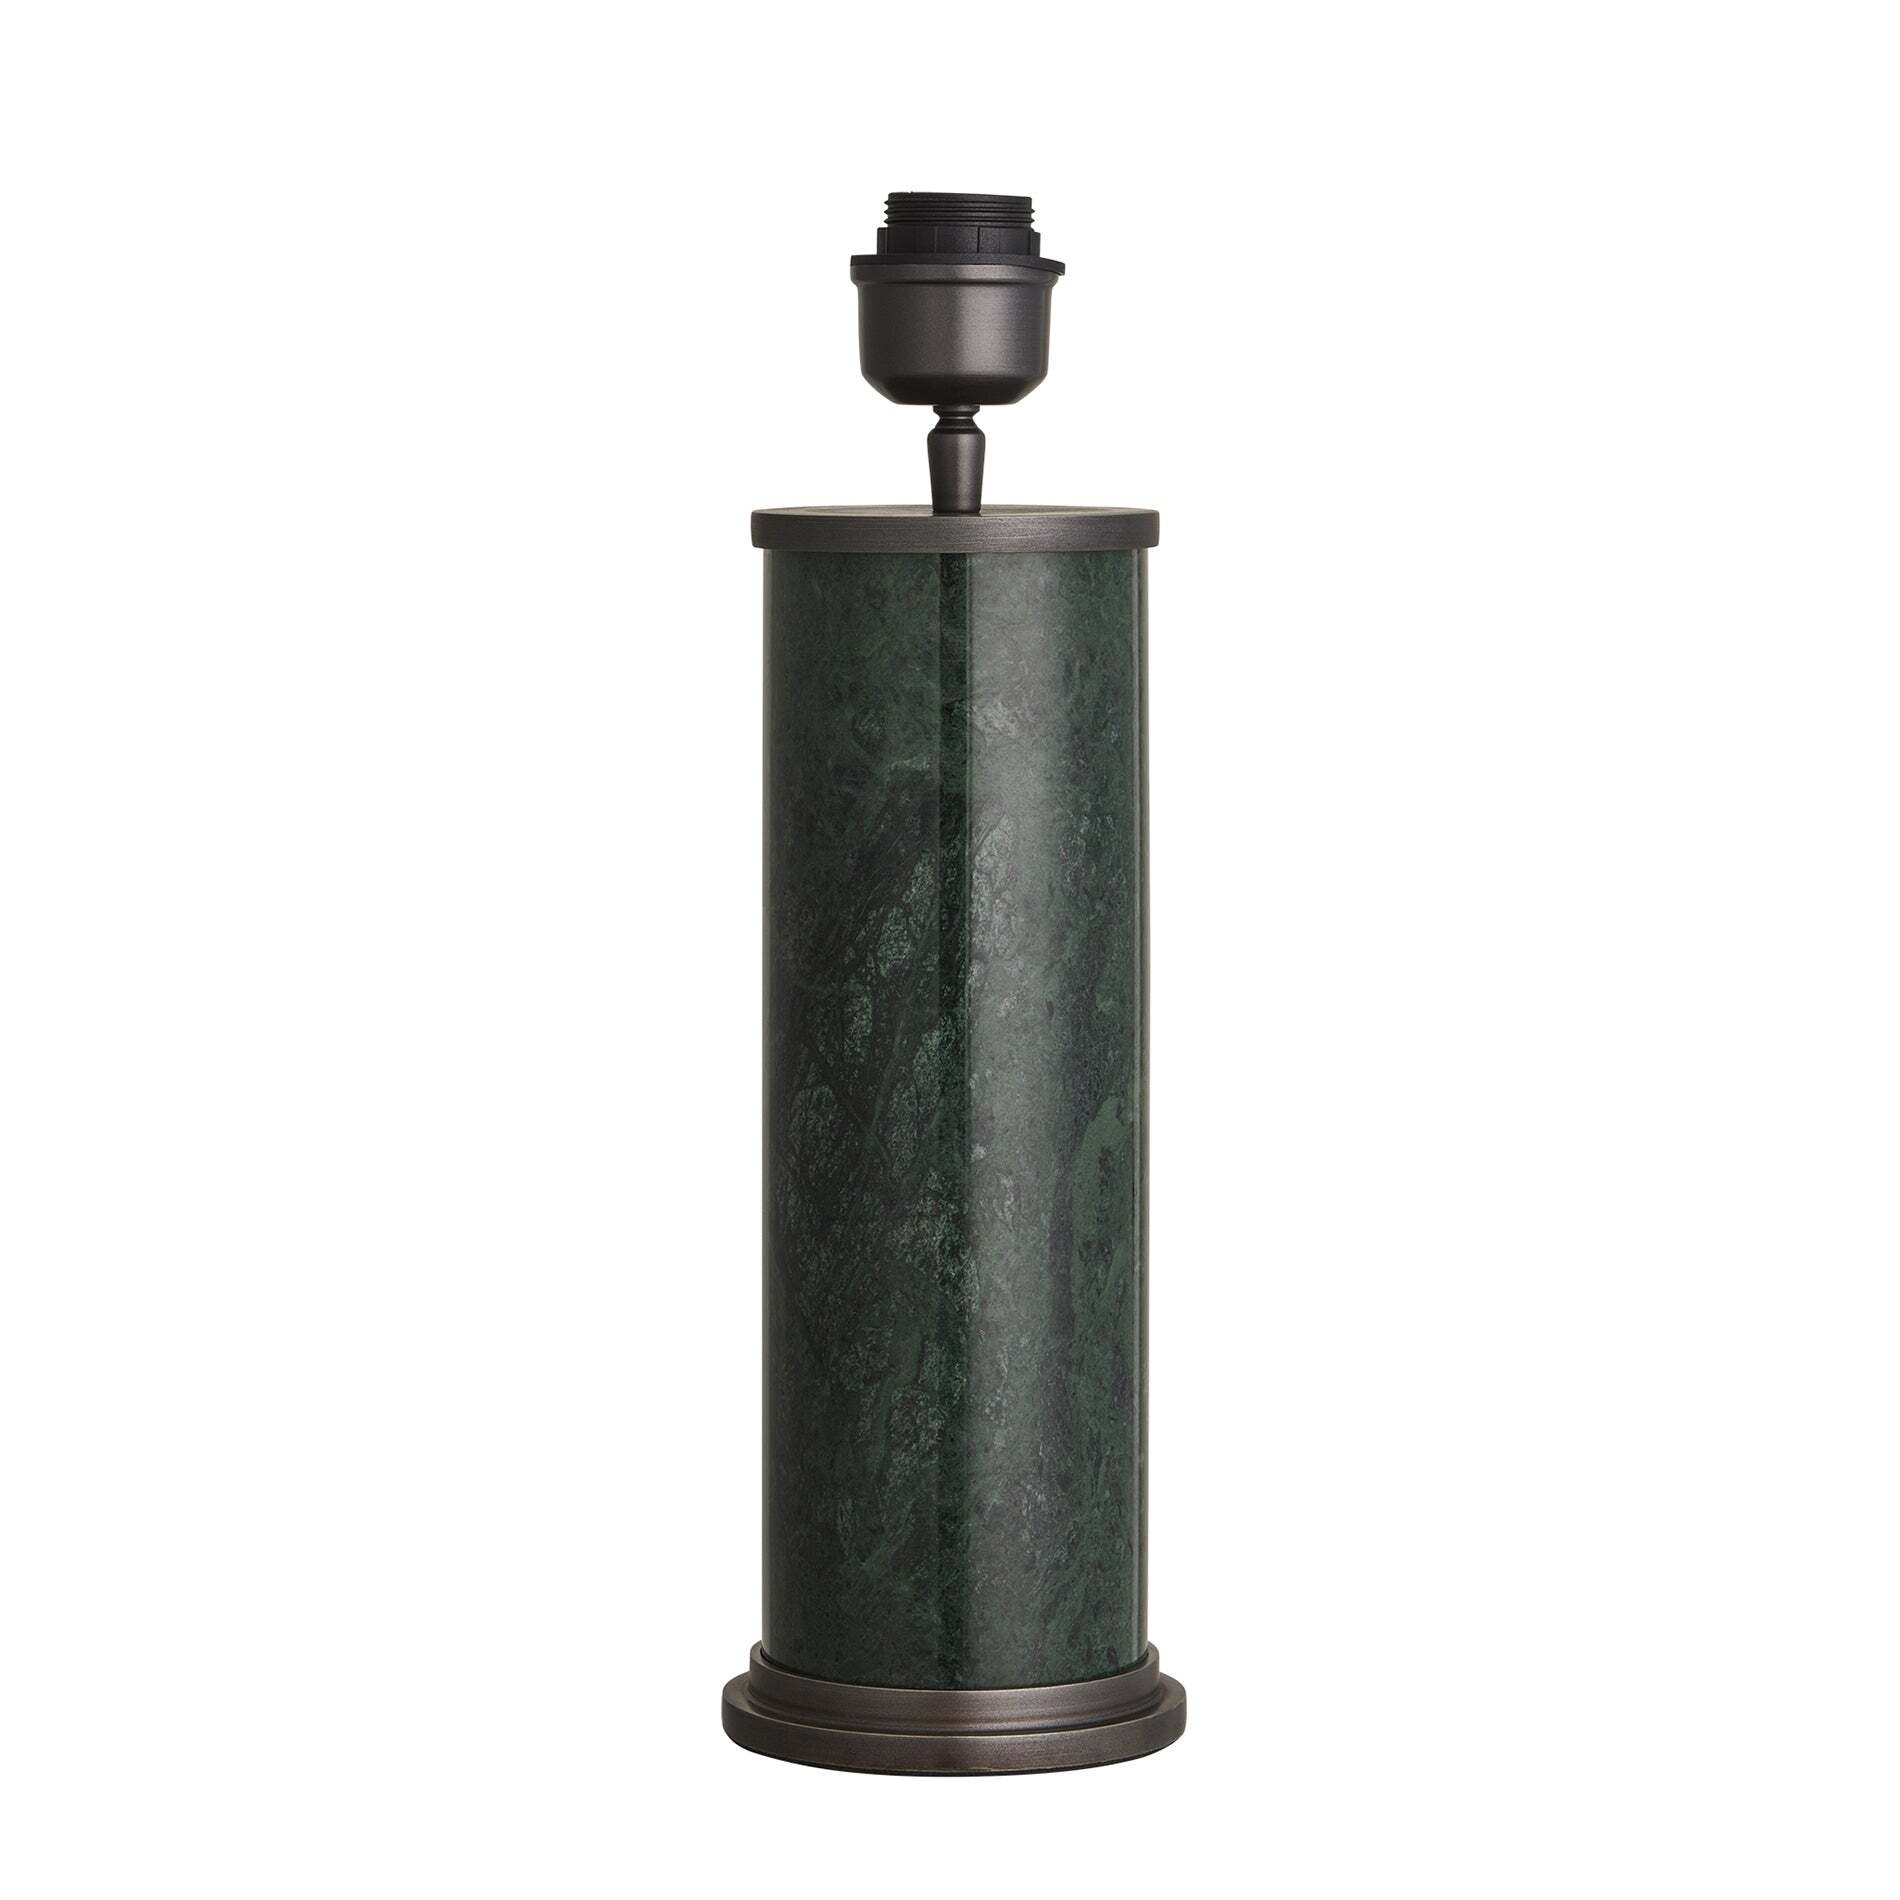 Marble Pillar Cylinder Table Lamp - Green with Pewter - Base Only